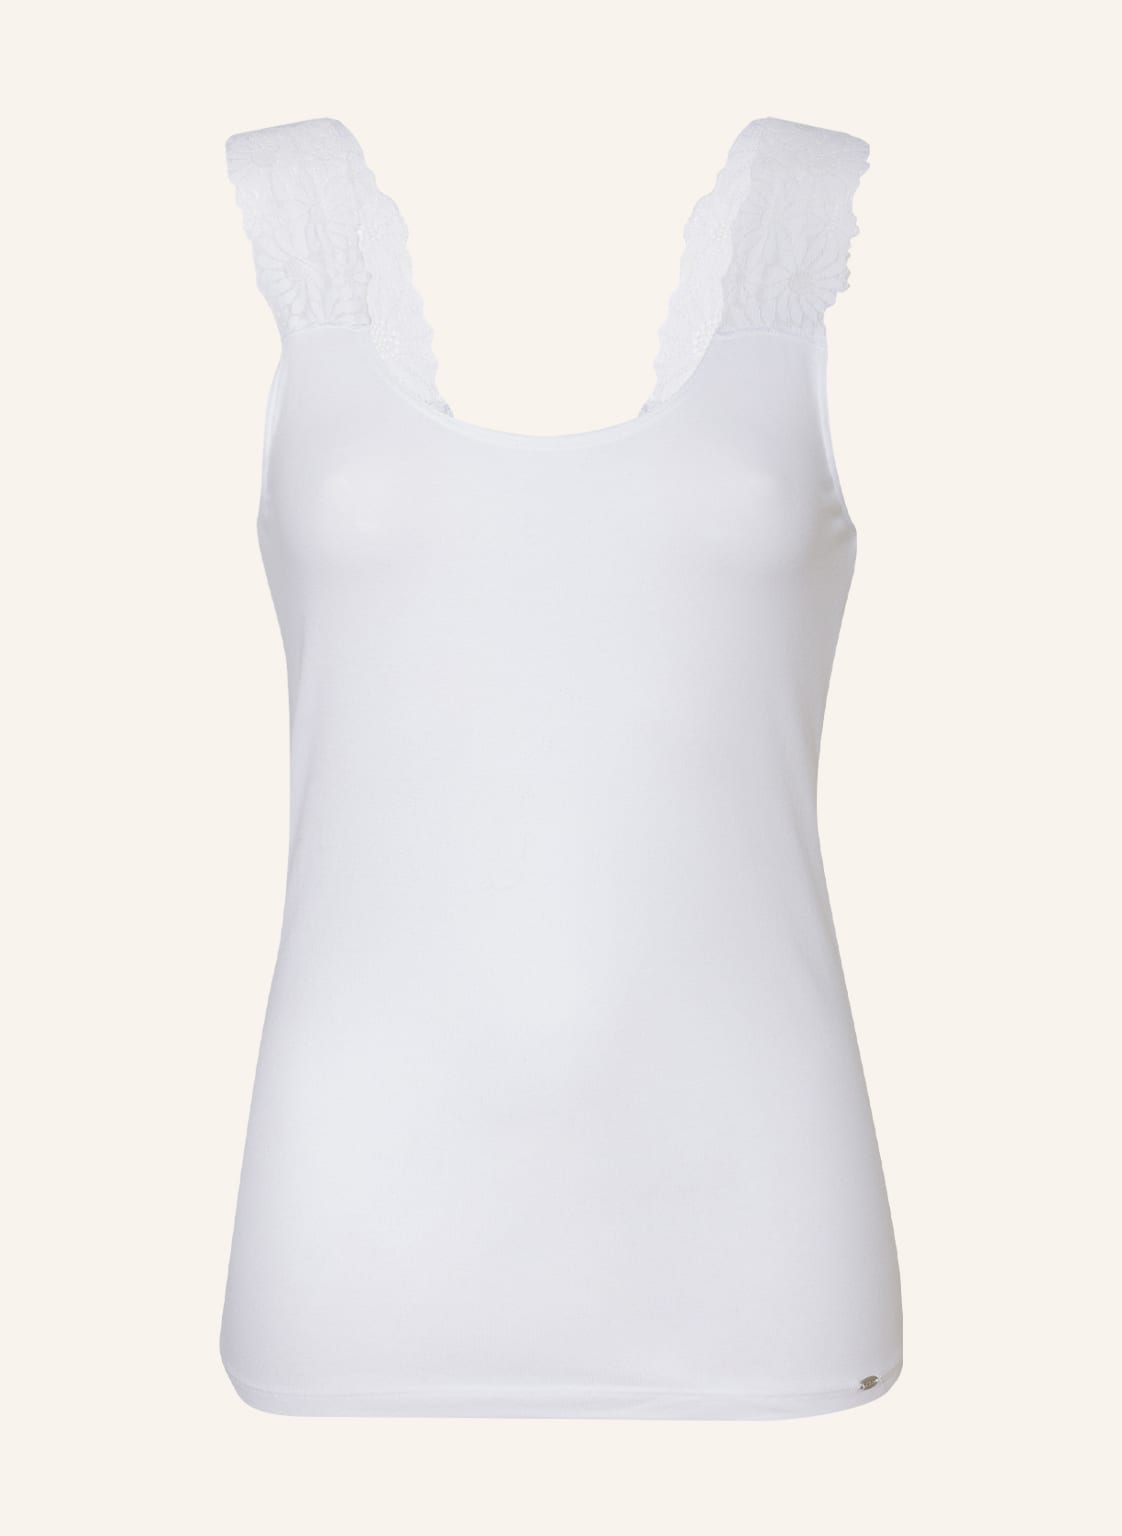 Skiny Top Every Day In Cotton weiss von SKINY